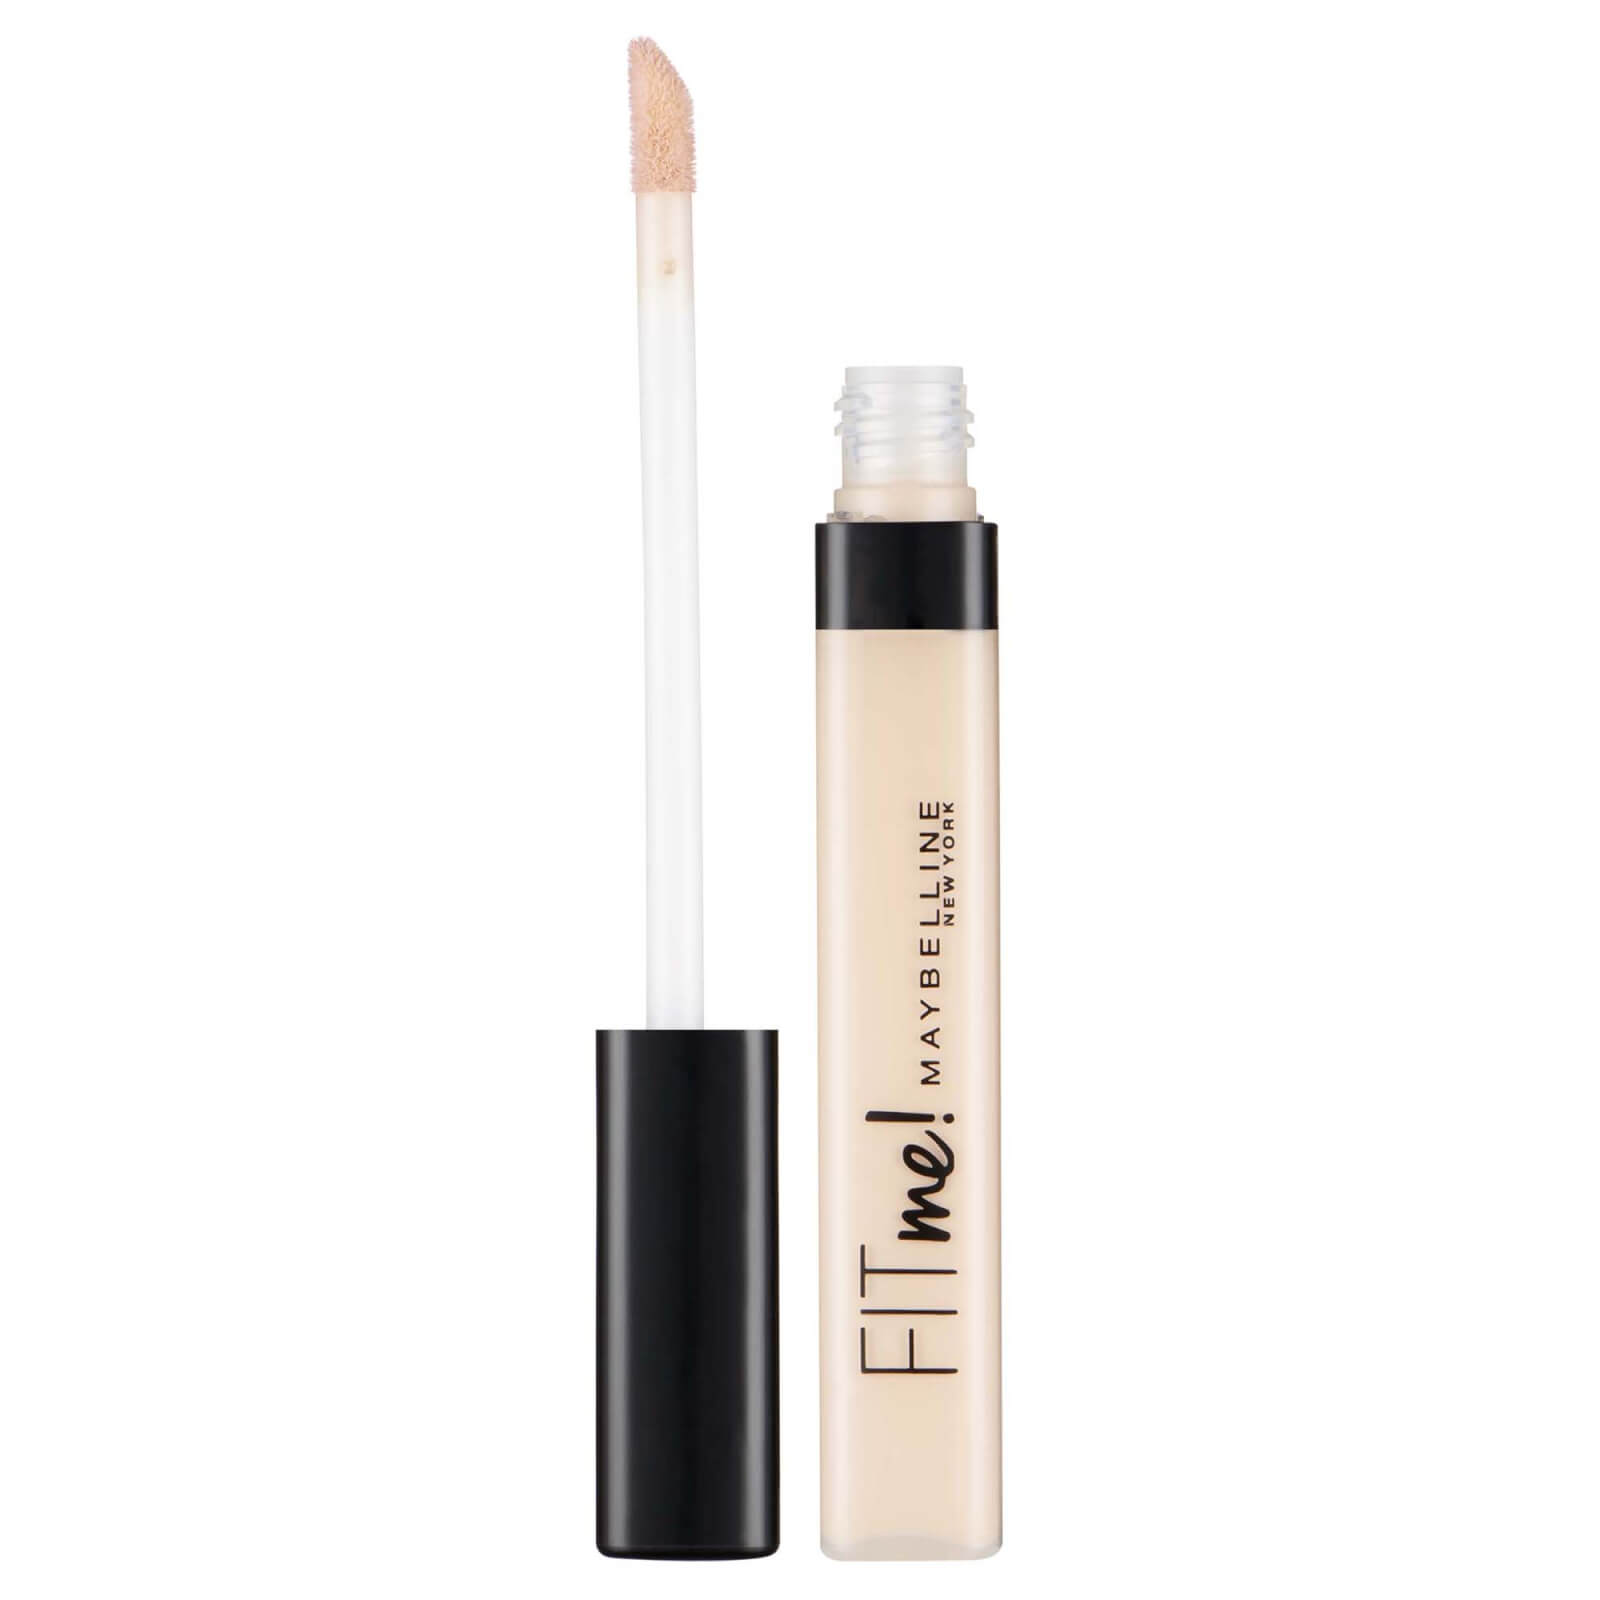 Image of Maybelline Fit Me correttore (varie tonalità) - 05 Ivory